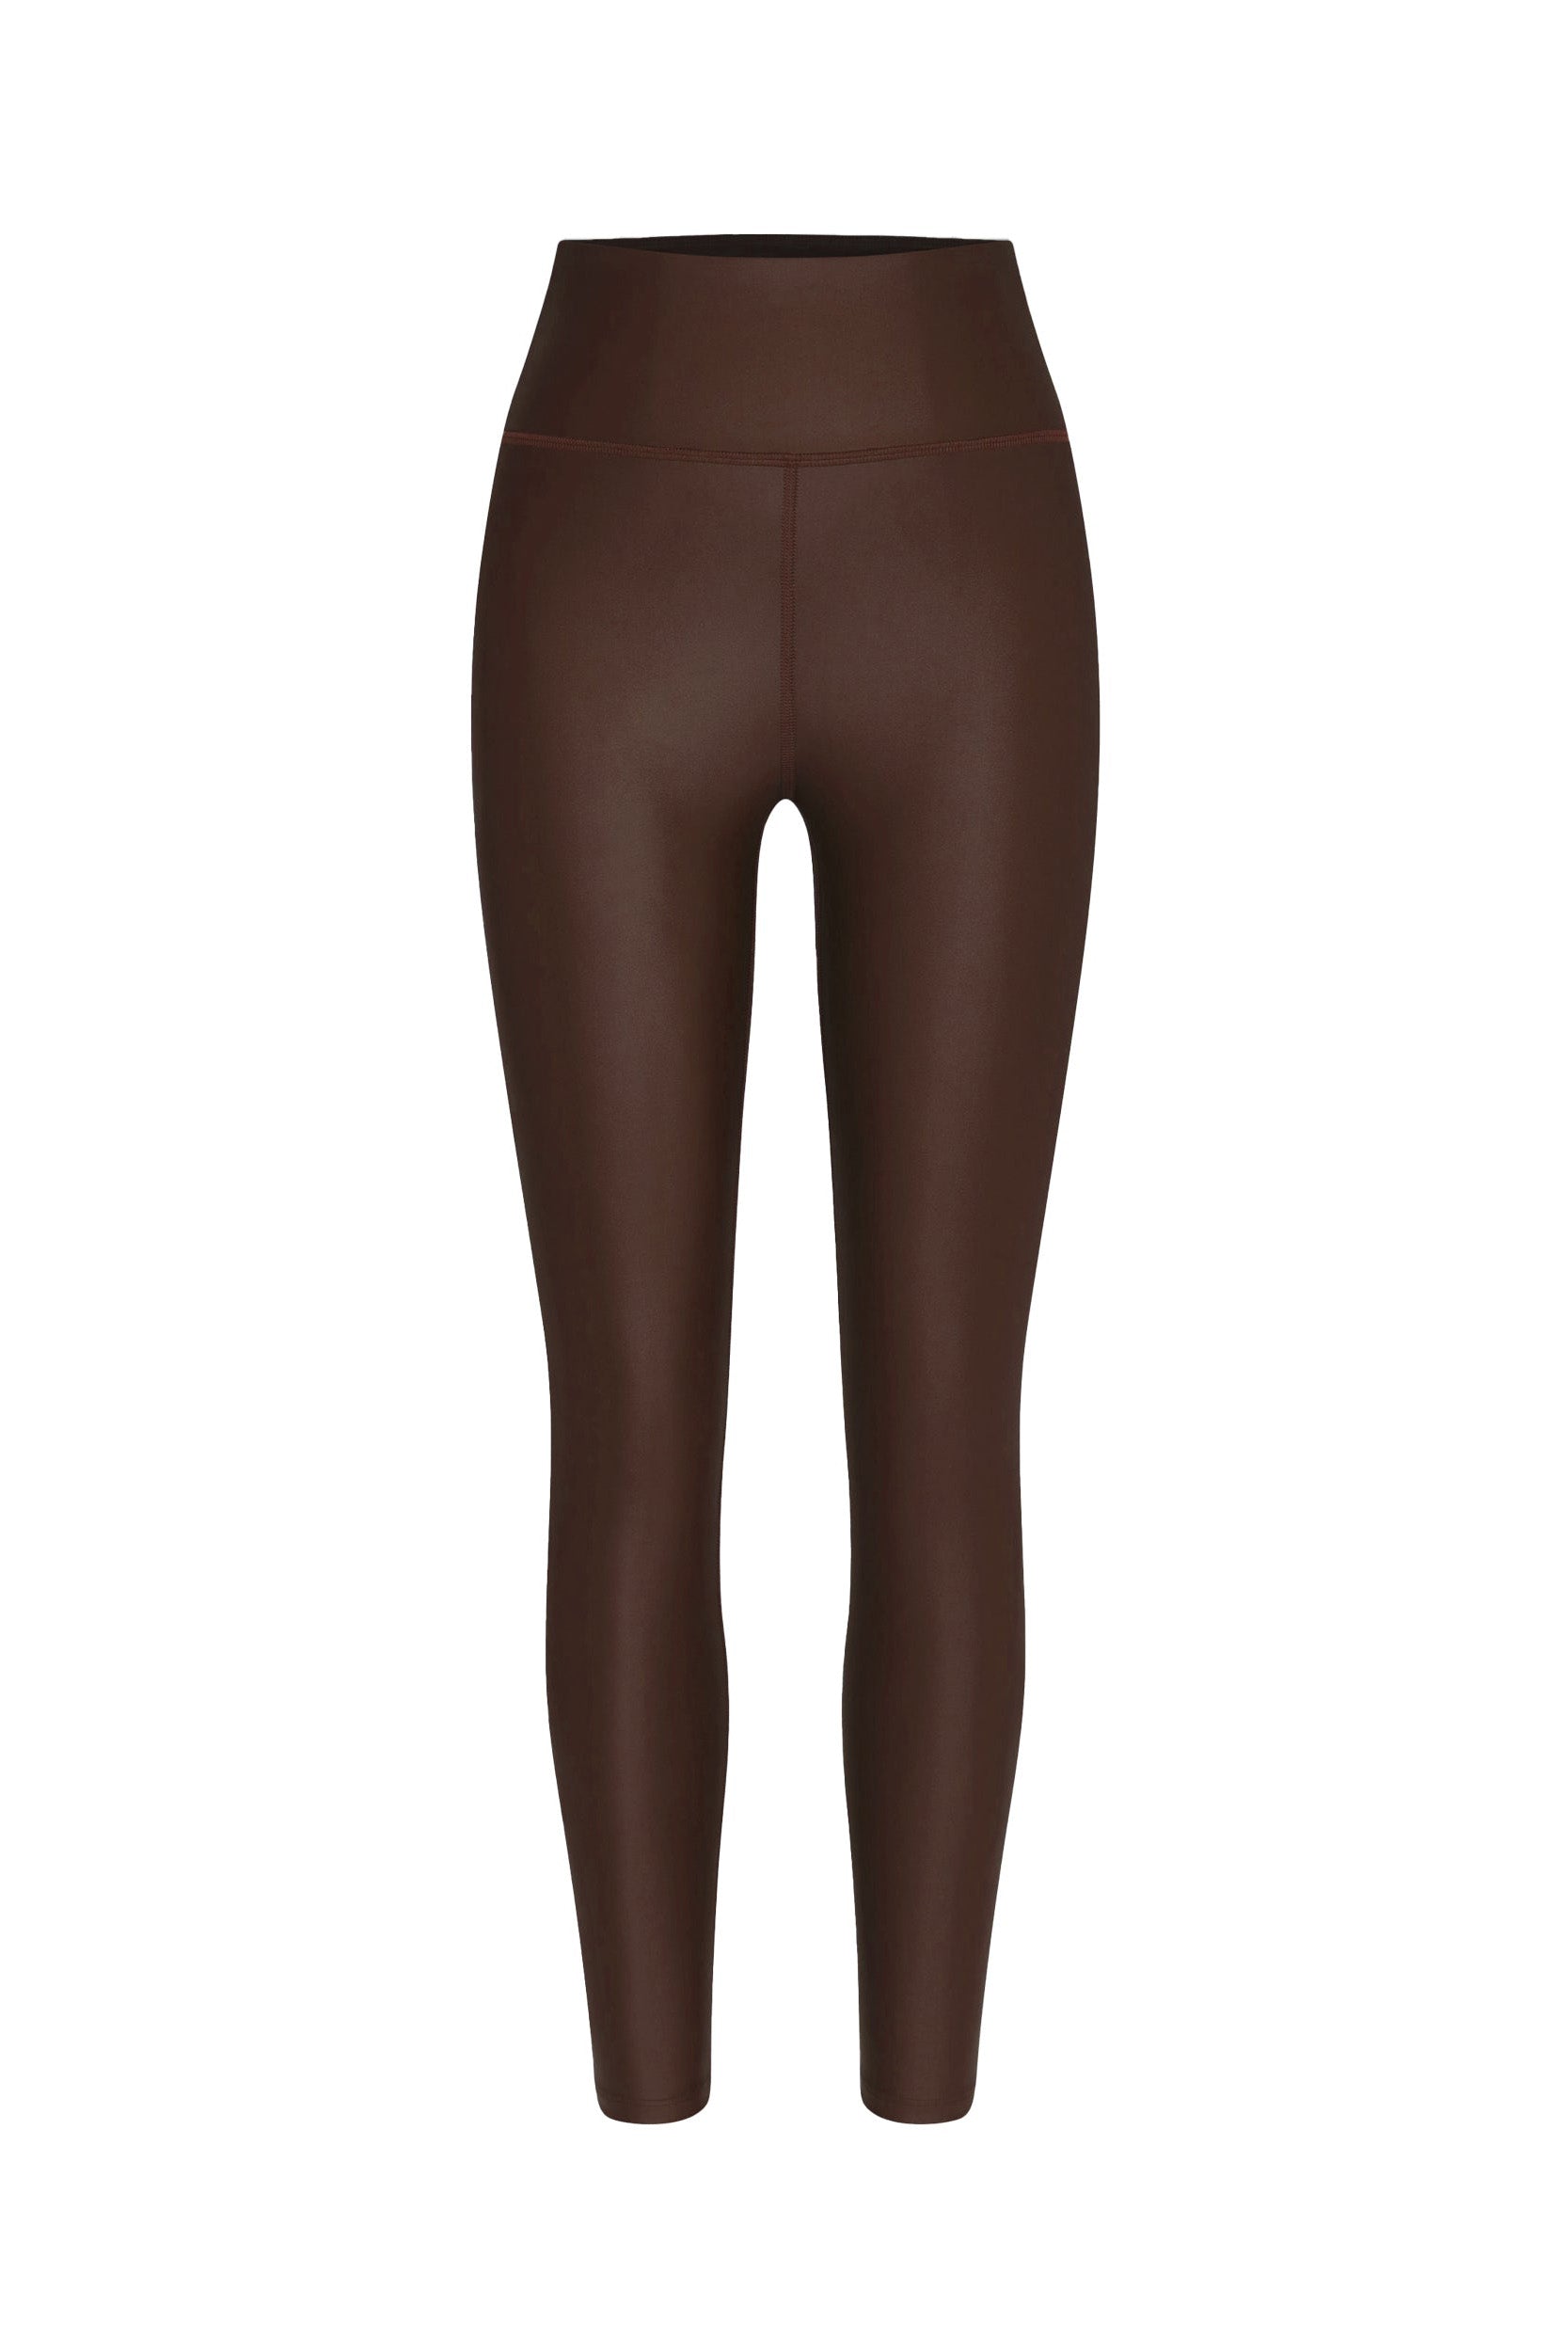 A pair of Liquid Leggings in the rich espresso color, these high-waisted, full-length yoga pants are made from smooth, stretchy material ideal for workouts. They feature a simple, seamless design with no visible logos or patterns.